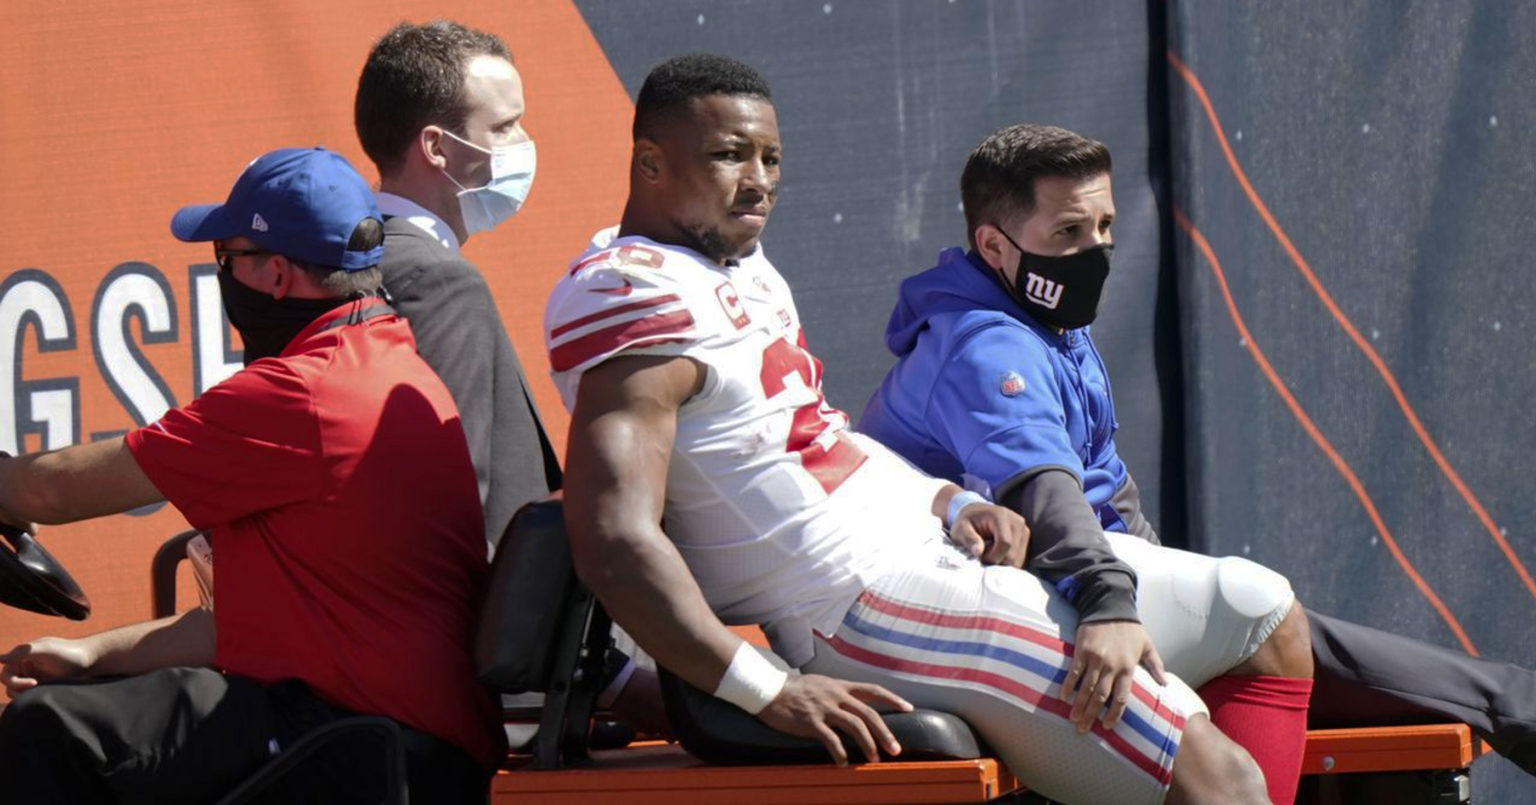 What injury has left the Giants Saquon Barkley in major pain?